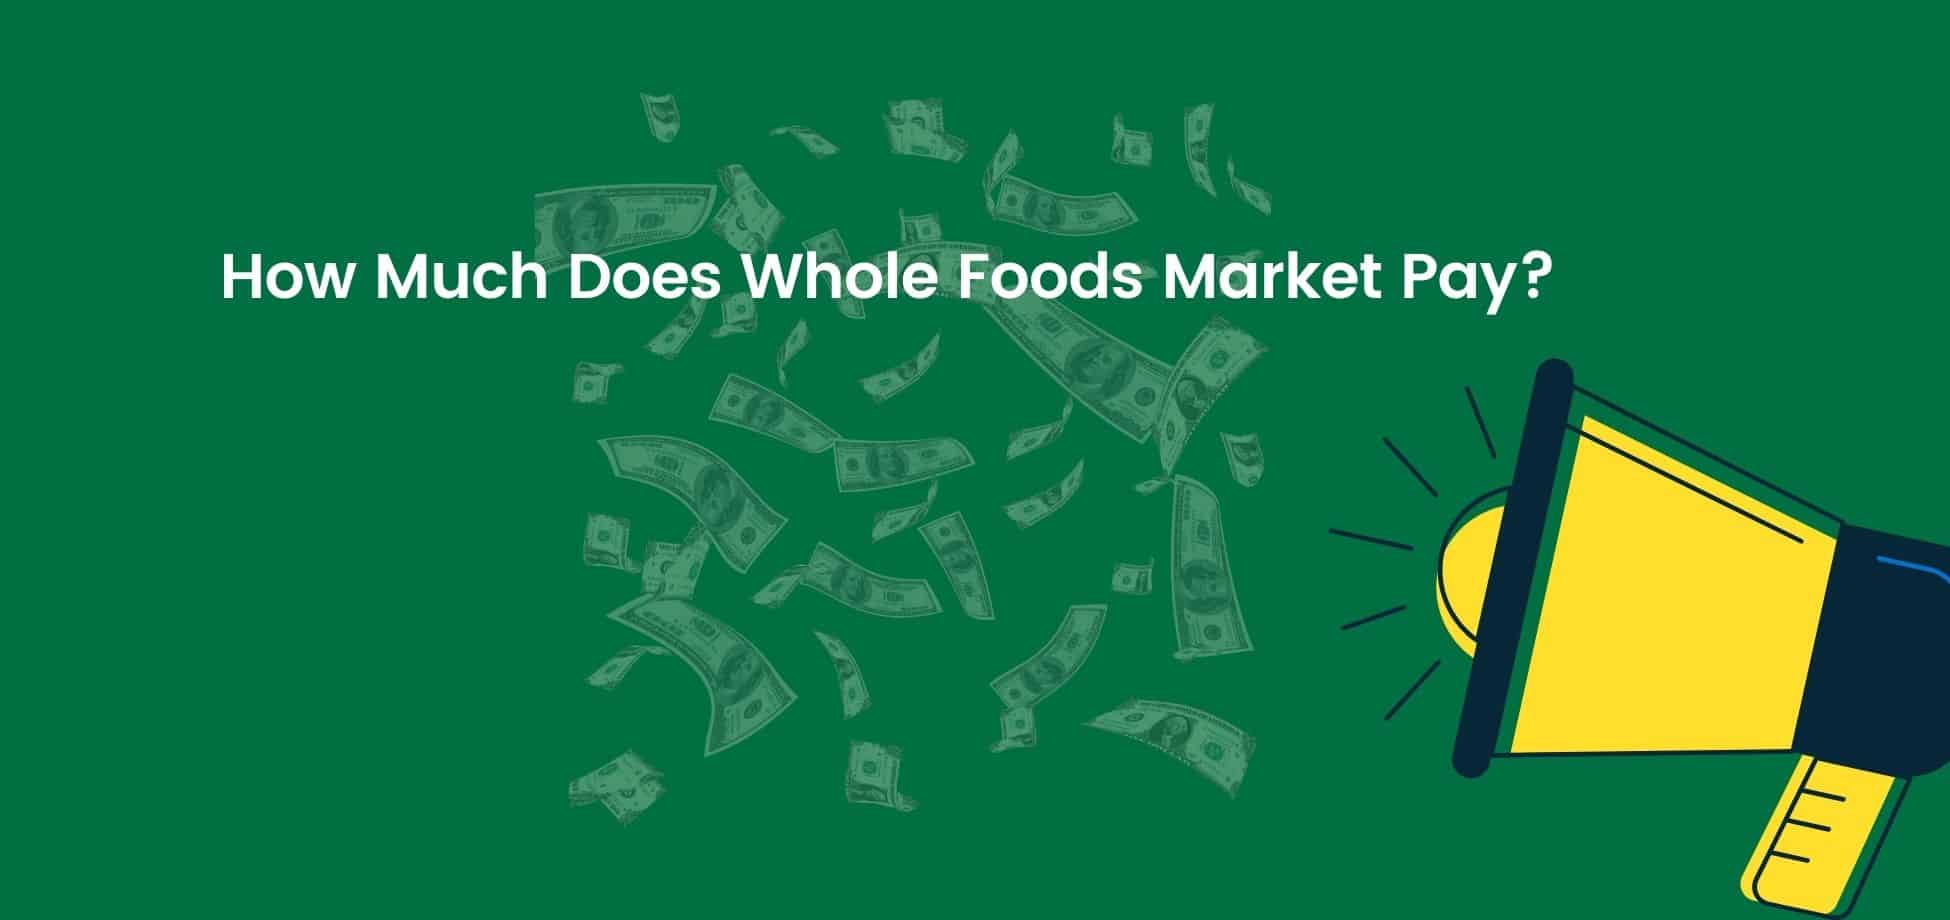 The Whole Foods Market salary scale  for workers is one of the best in the supermarket industry.